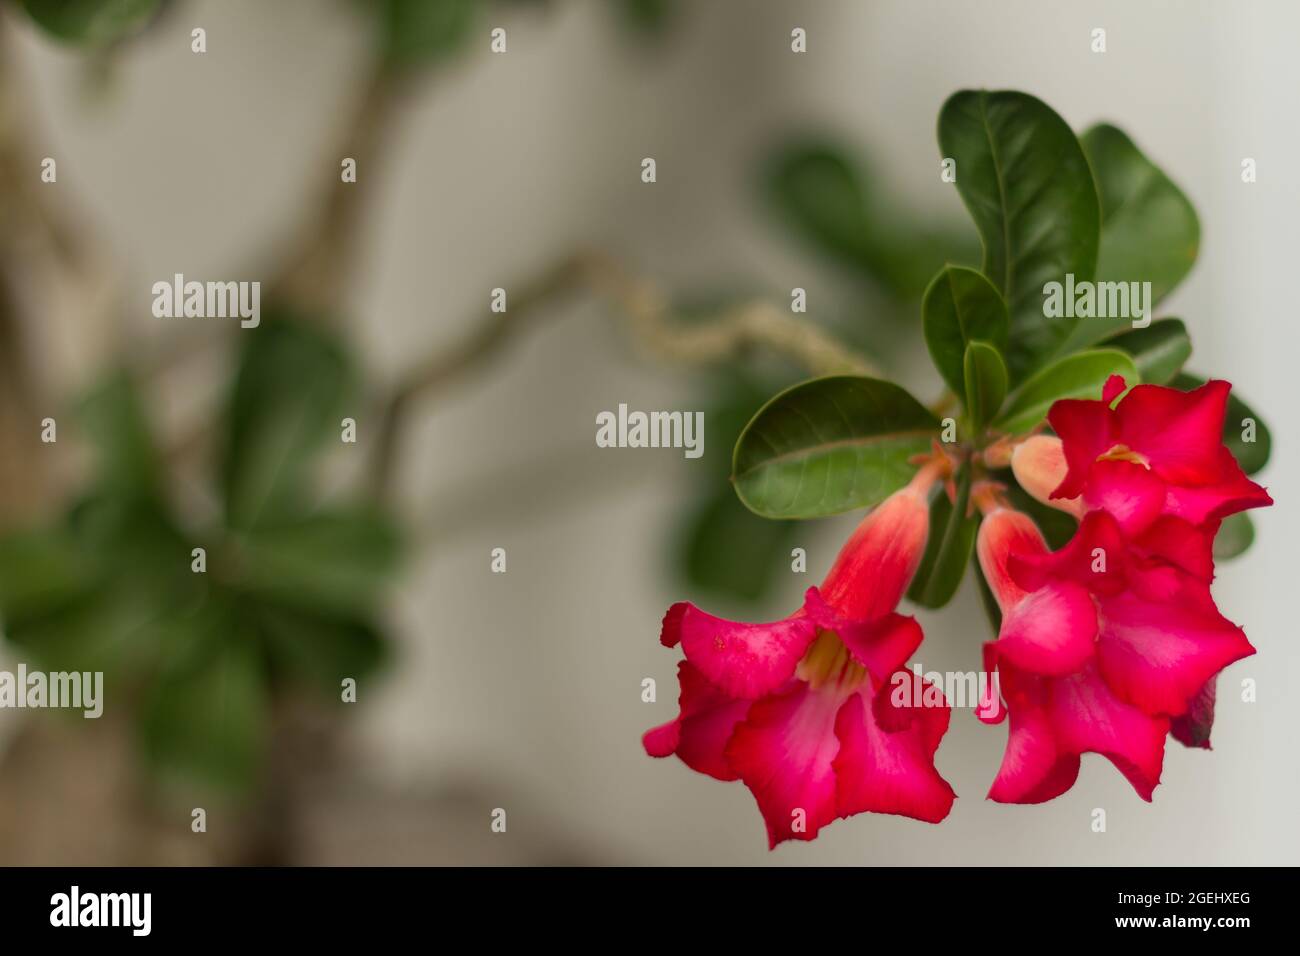 The Japanese frangipani flower, adenium obesium, is in bloom with a bright red color Stock Photo